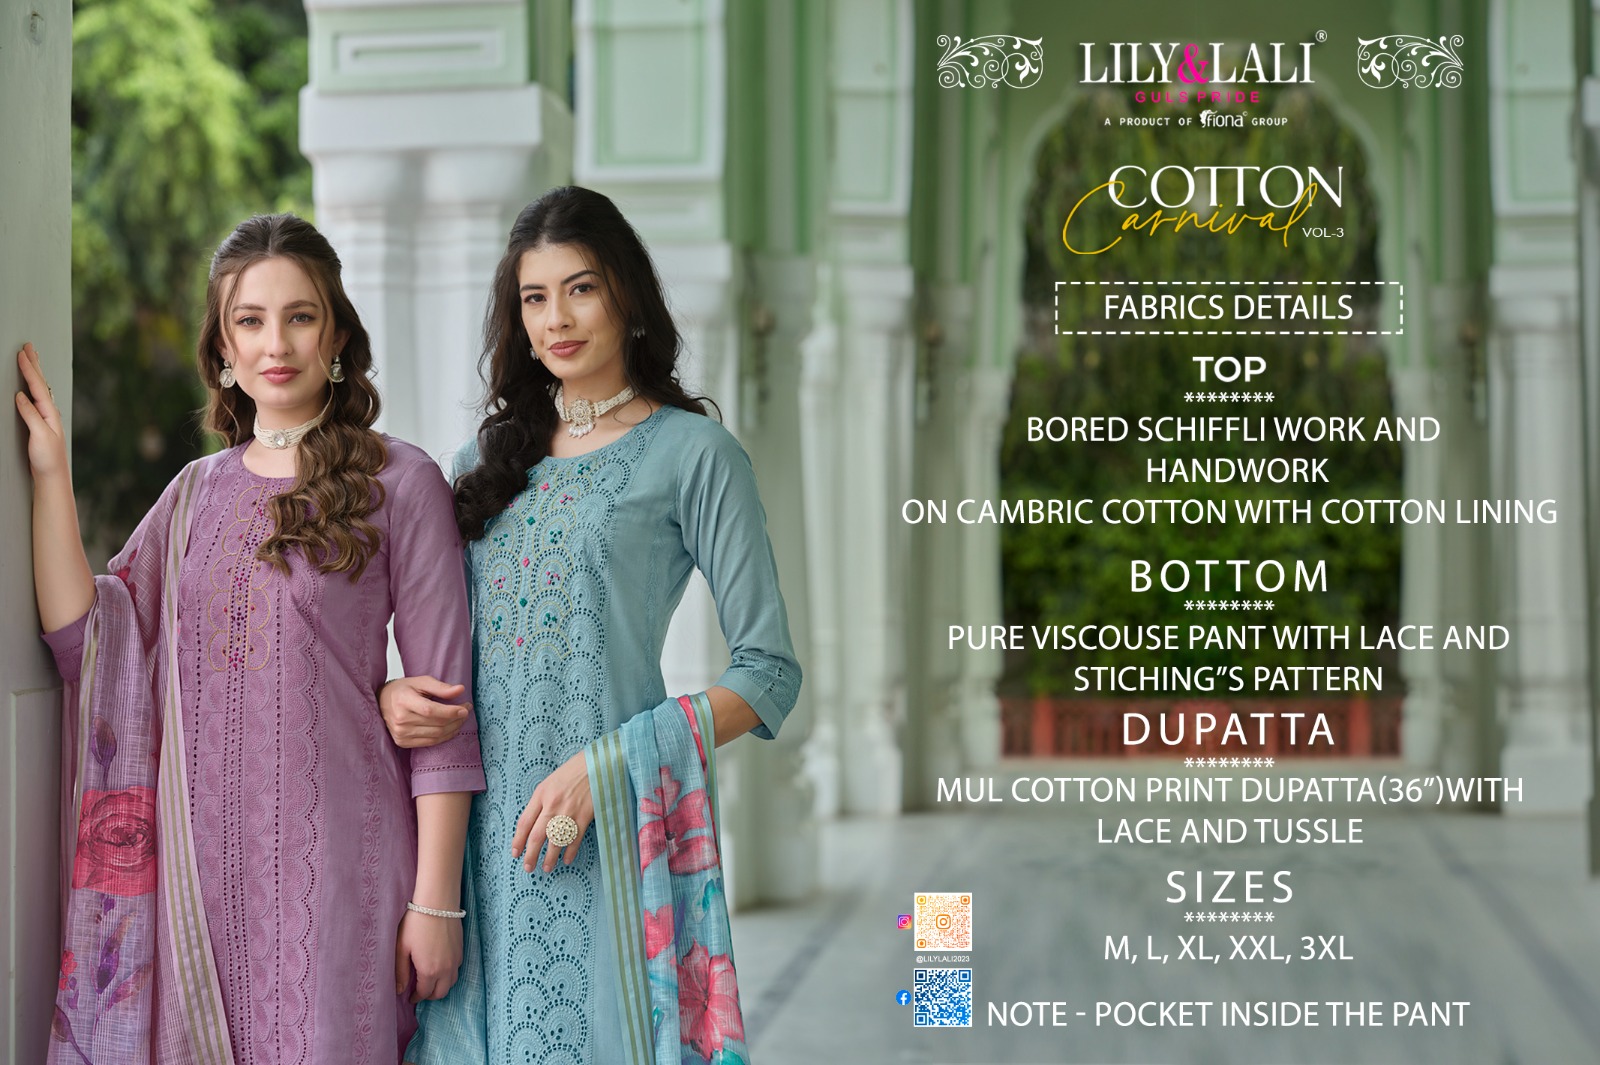 Lily And Lali Cotton Carnival Vol 3 collection 1